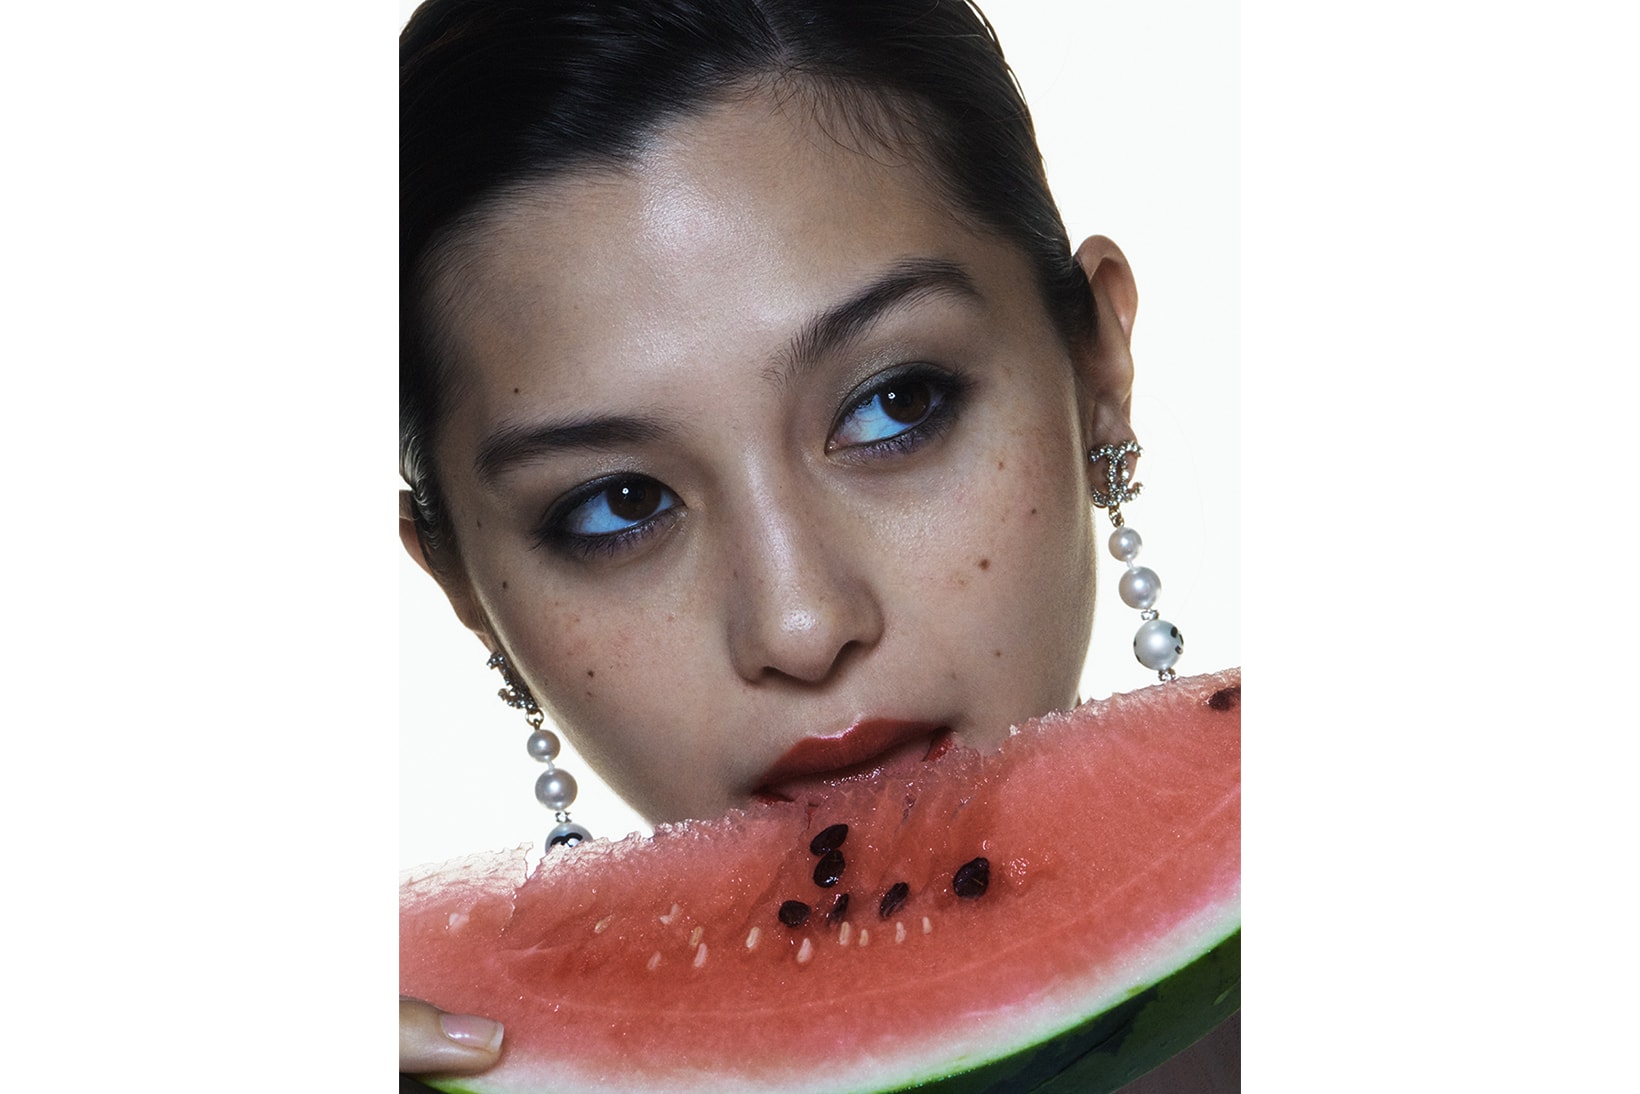 avenues for justice pics for the kids donation charity photography portrait woman watermelon earrings jewelry